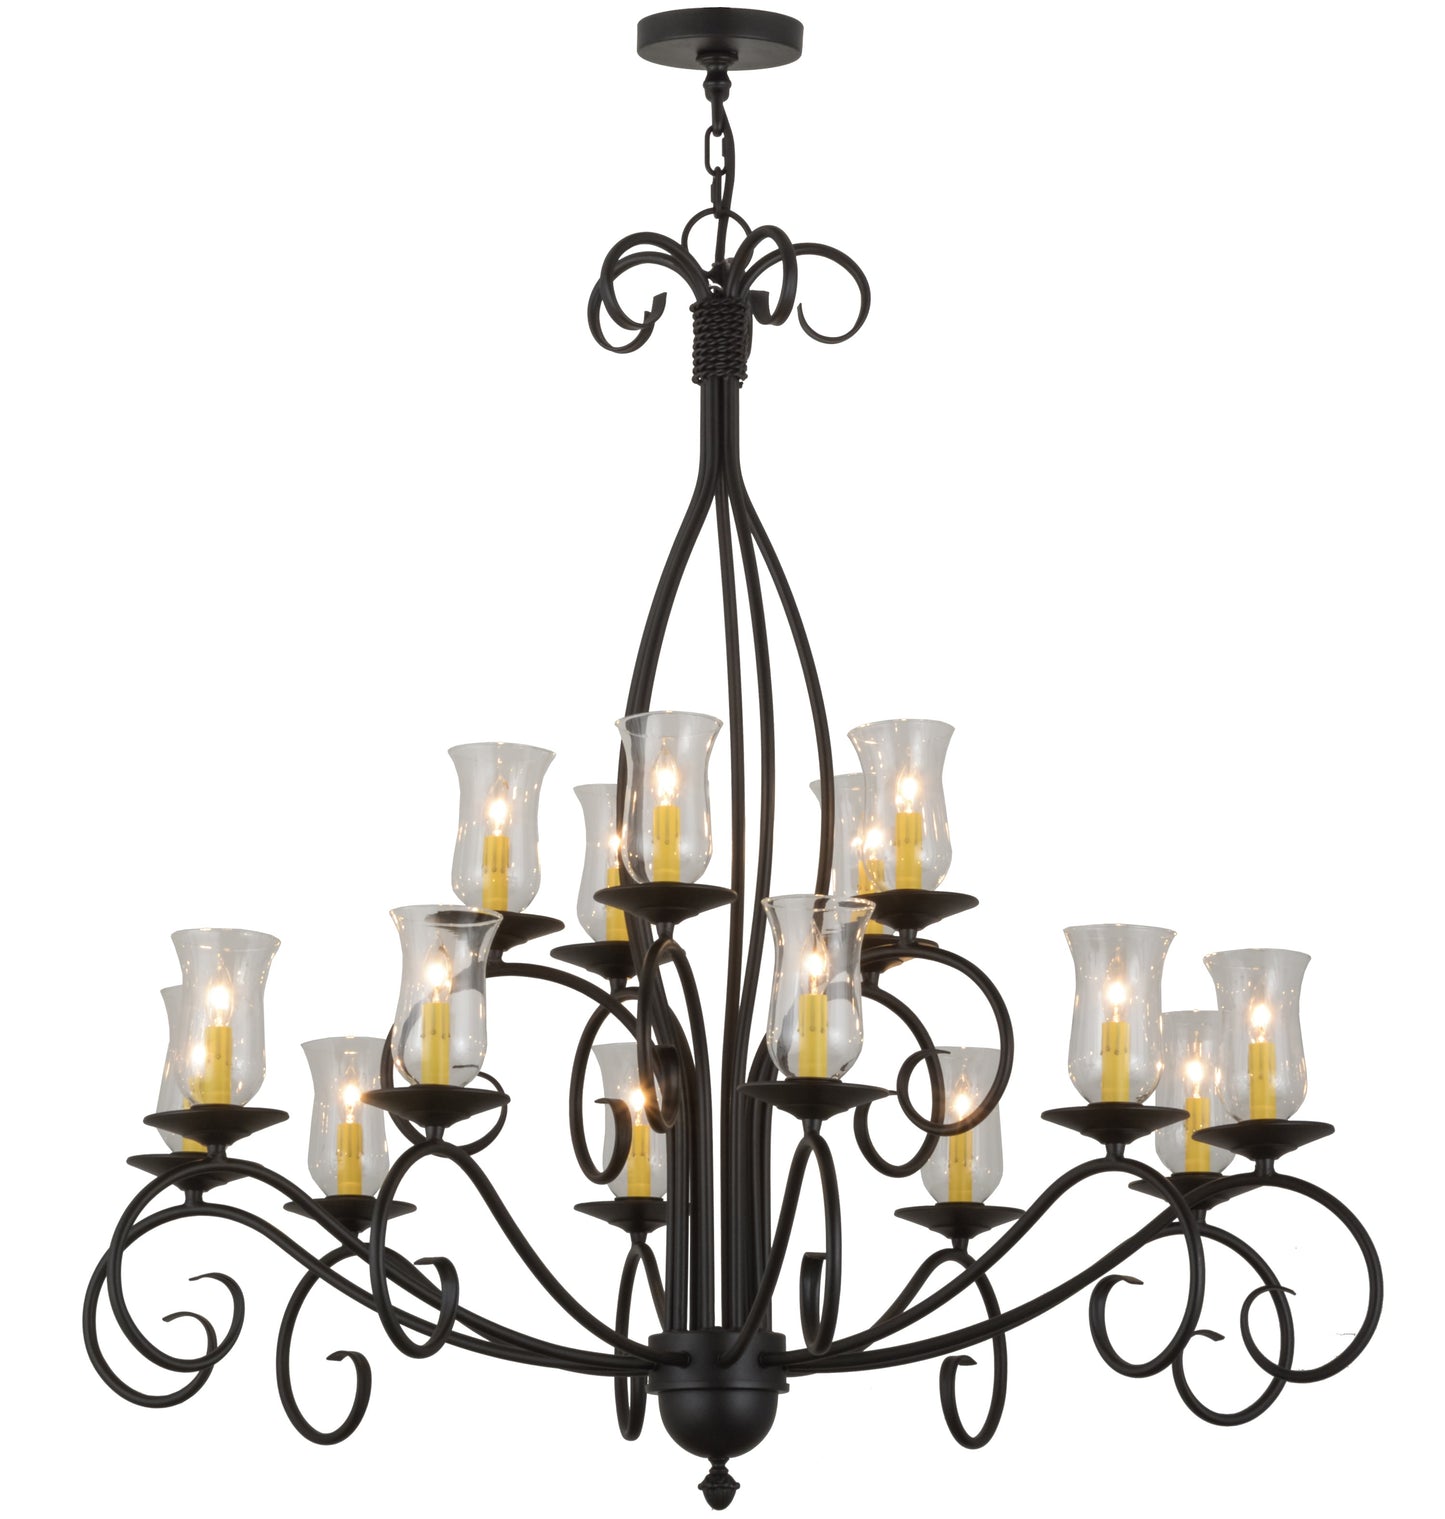 48" Sienna 15-Light Two Tier Chandelier by 2nd Ave Lighting